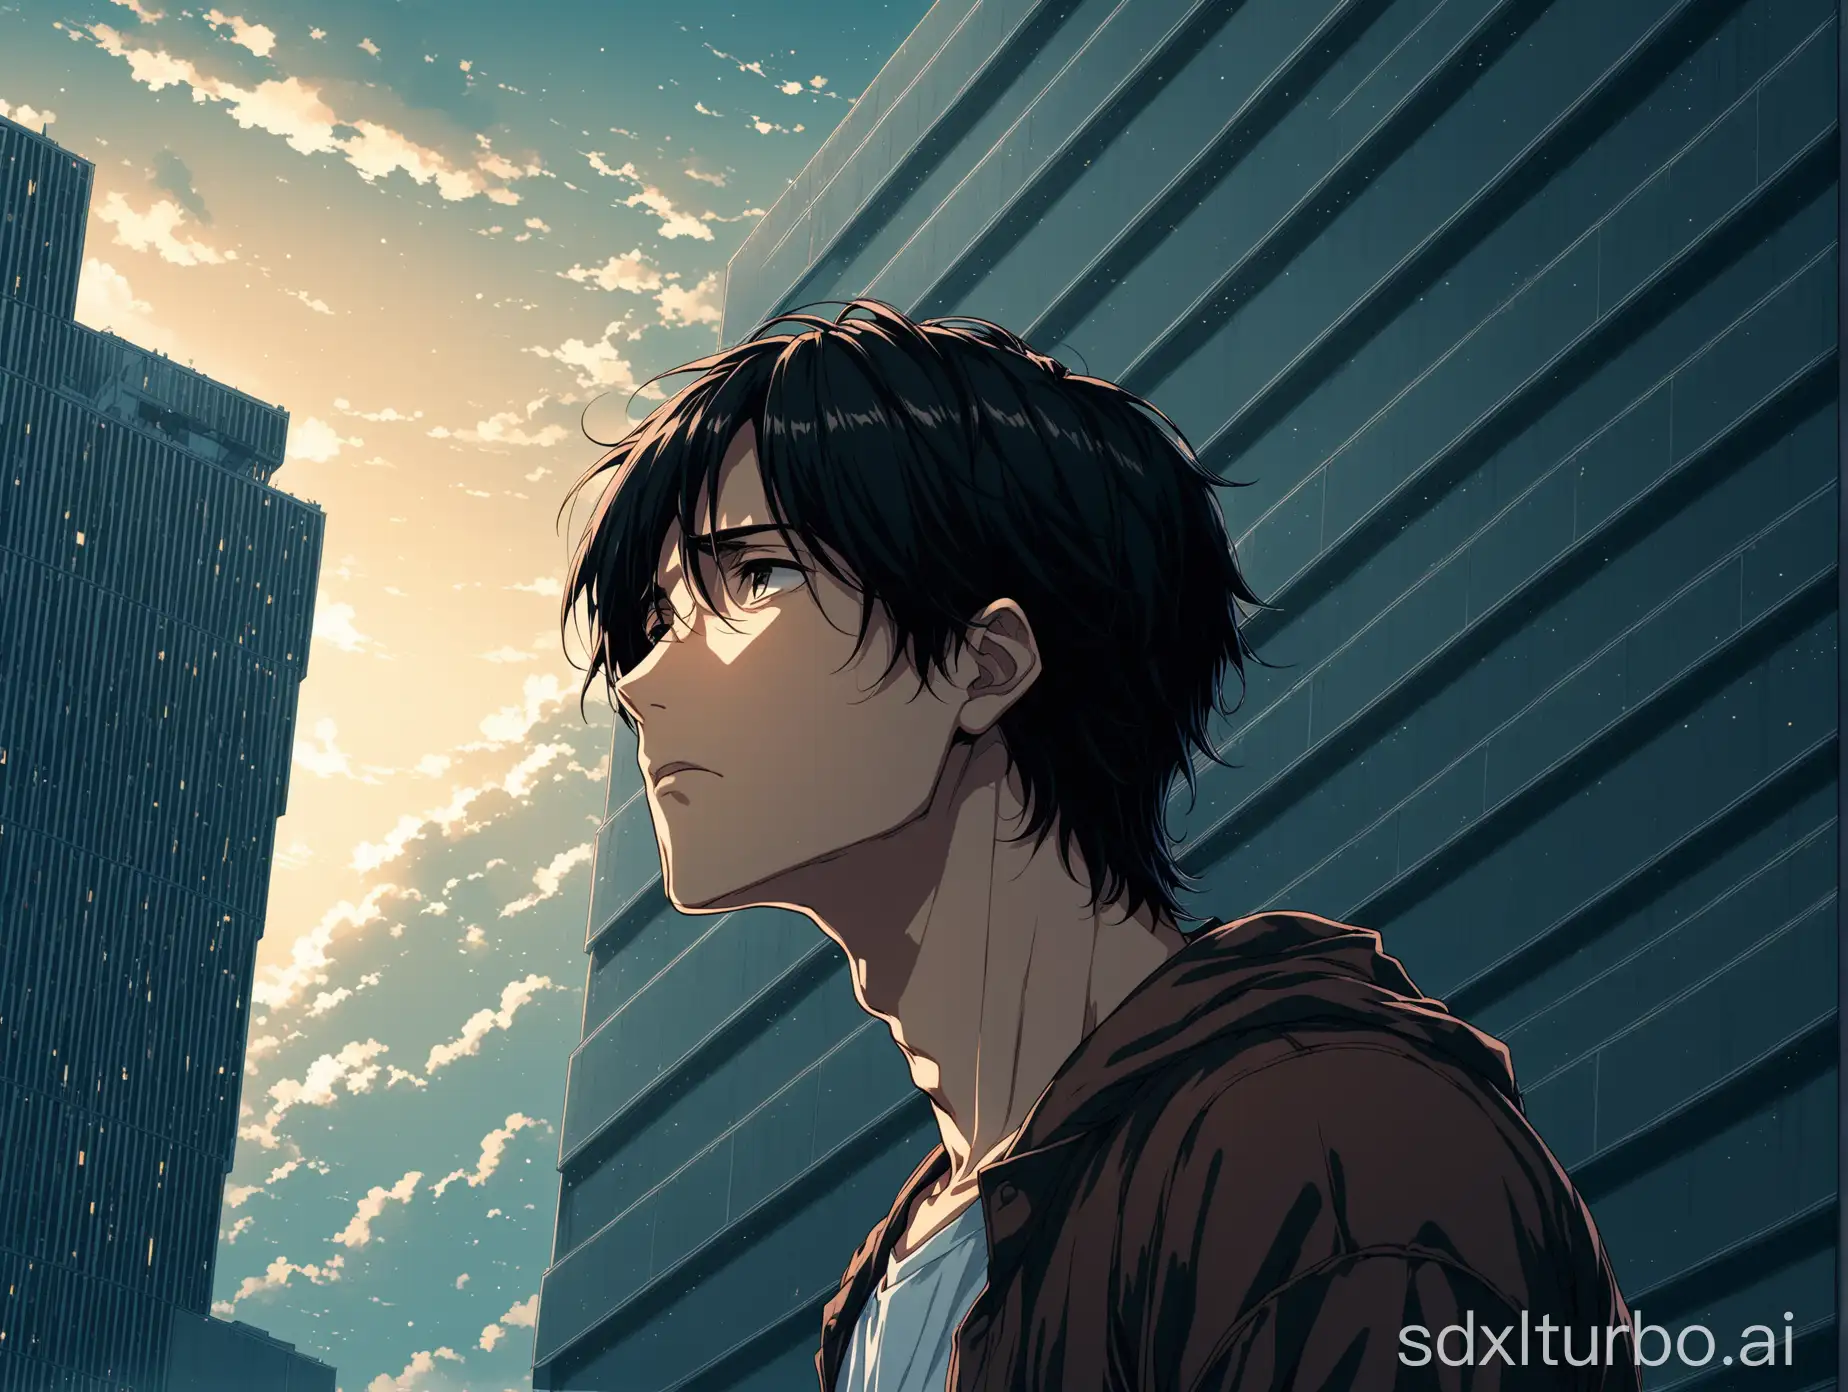 Anime wallpaper of a dark haired male character who is depressed, looking up at a modern building , hopeless, studio Ufotabele style